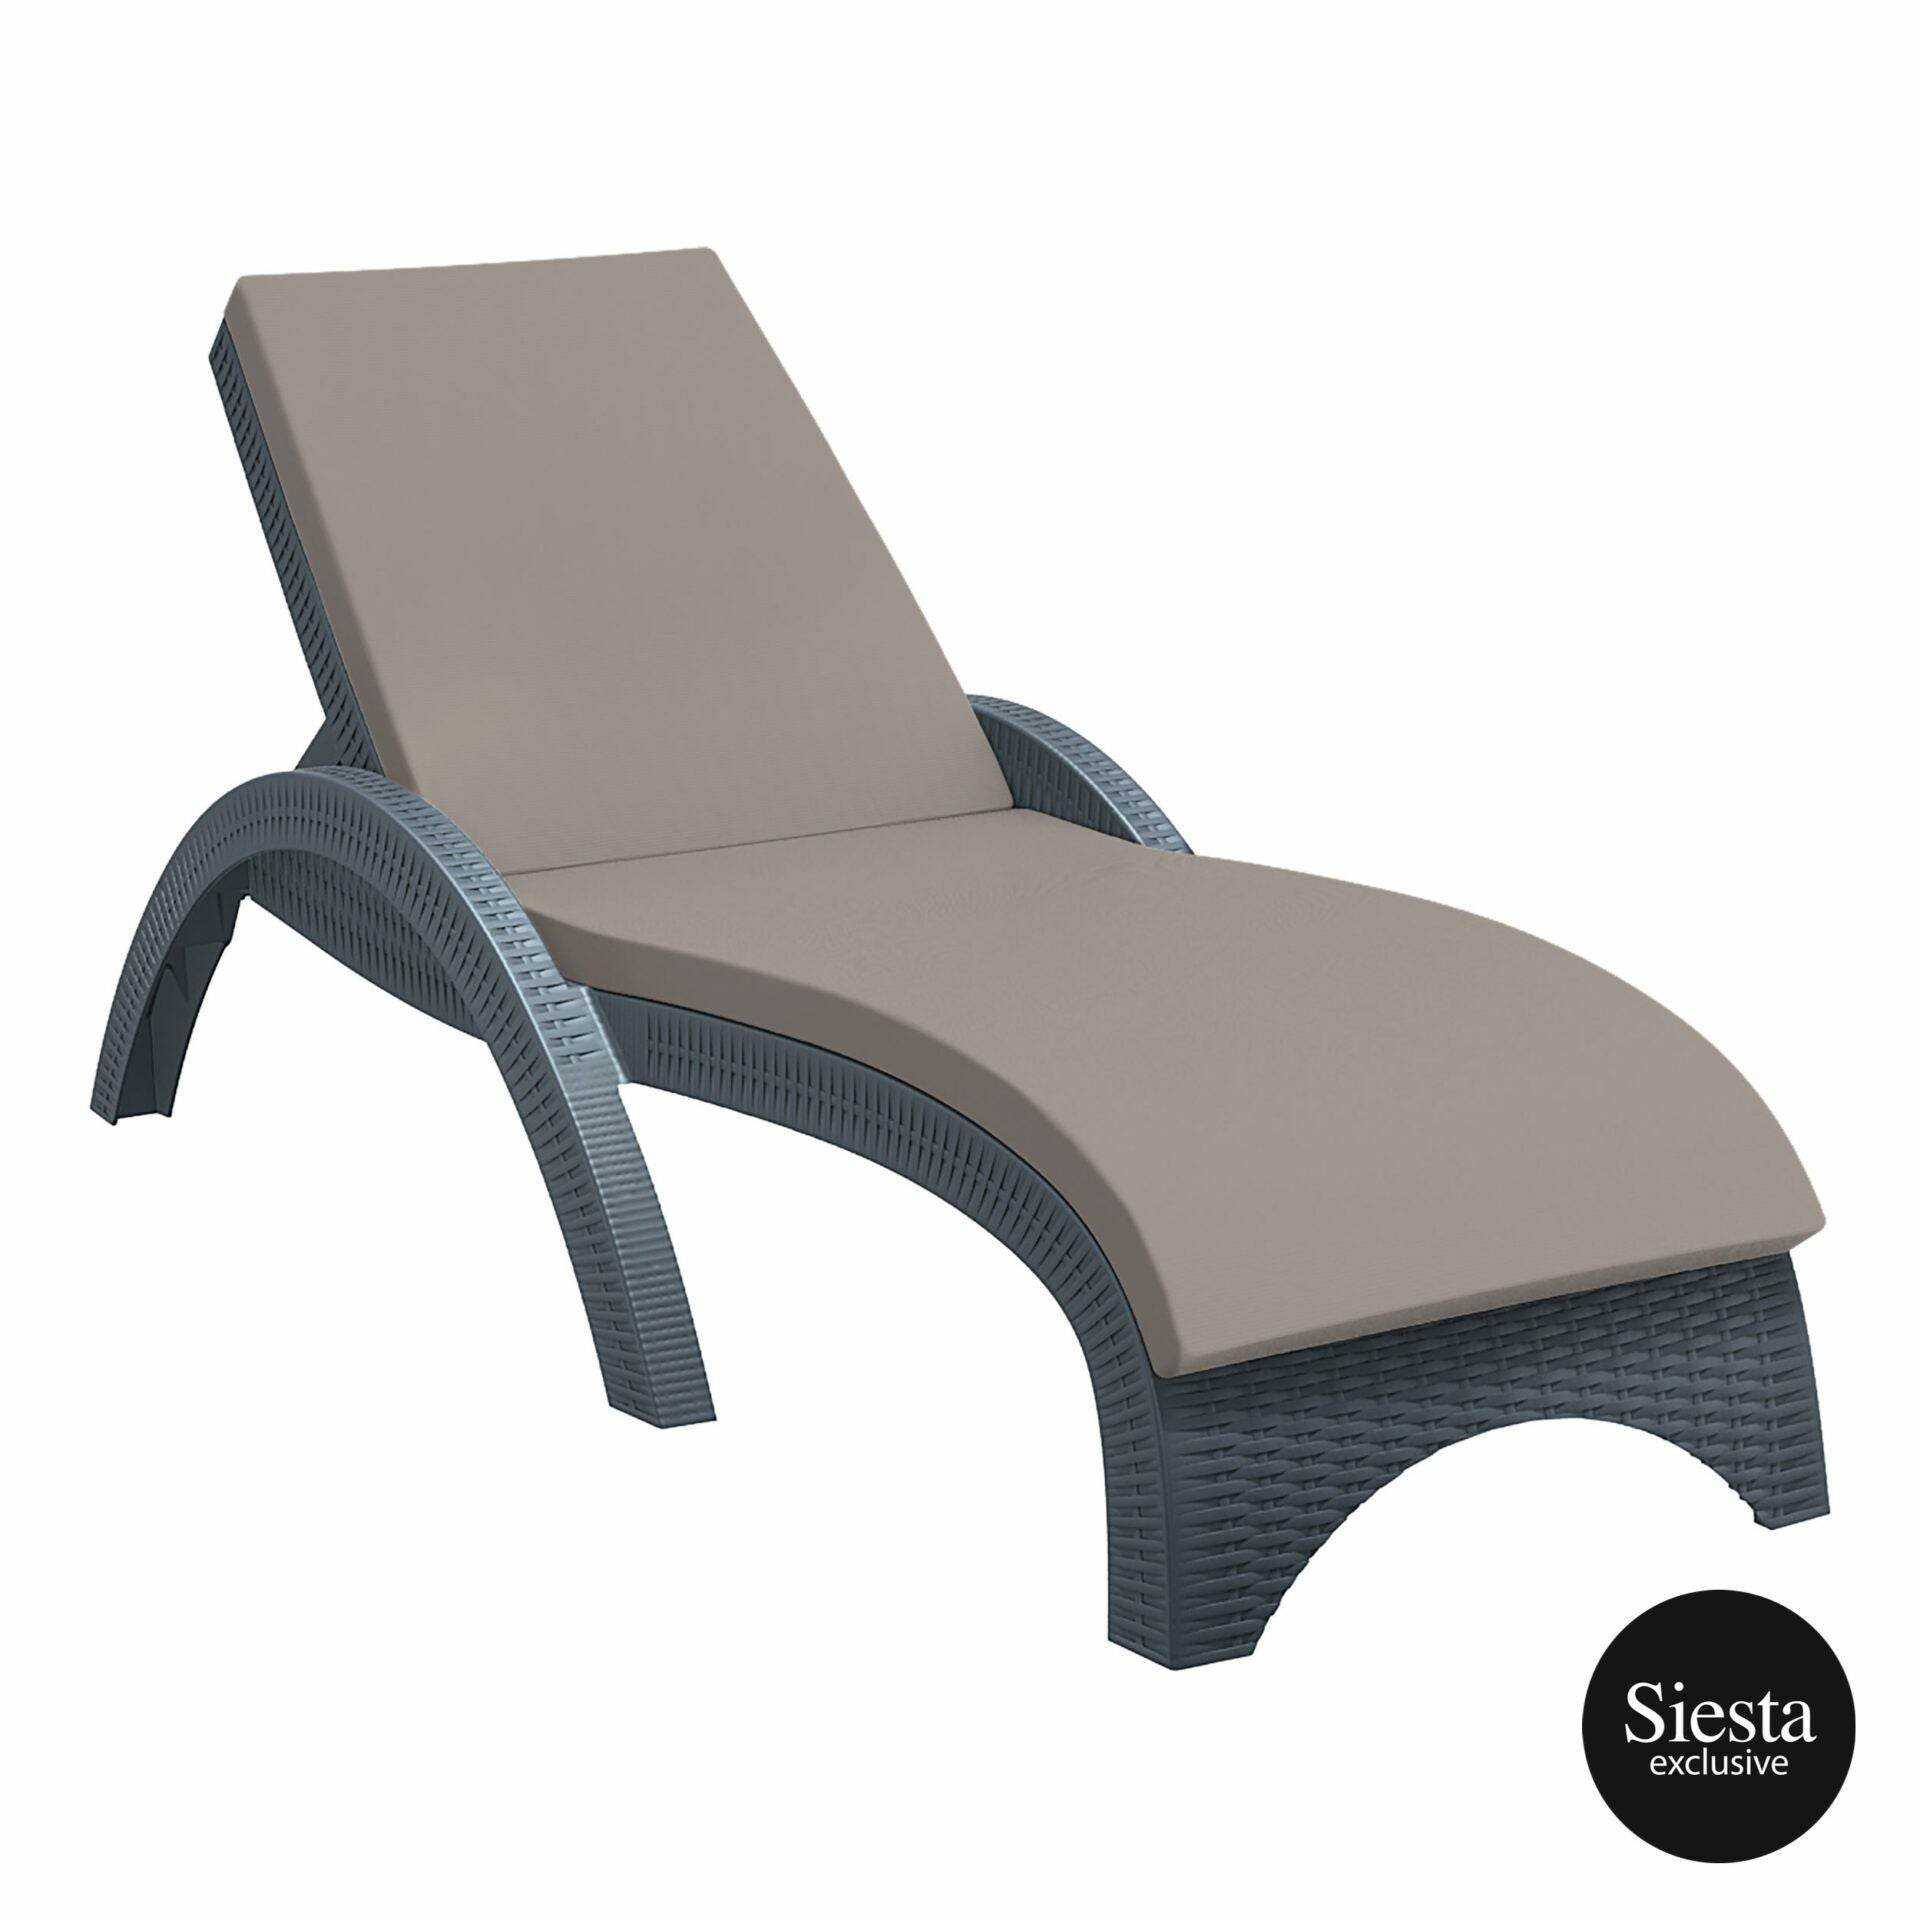 Fiji Sunlounge - Anthracite with Light Brown etisilk Cushion